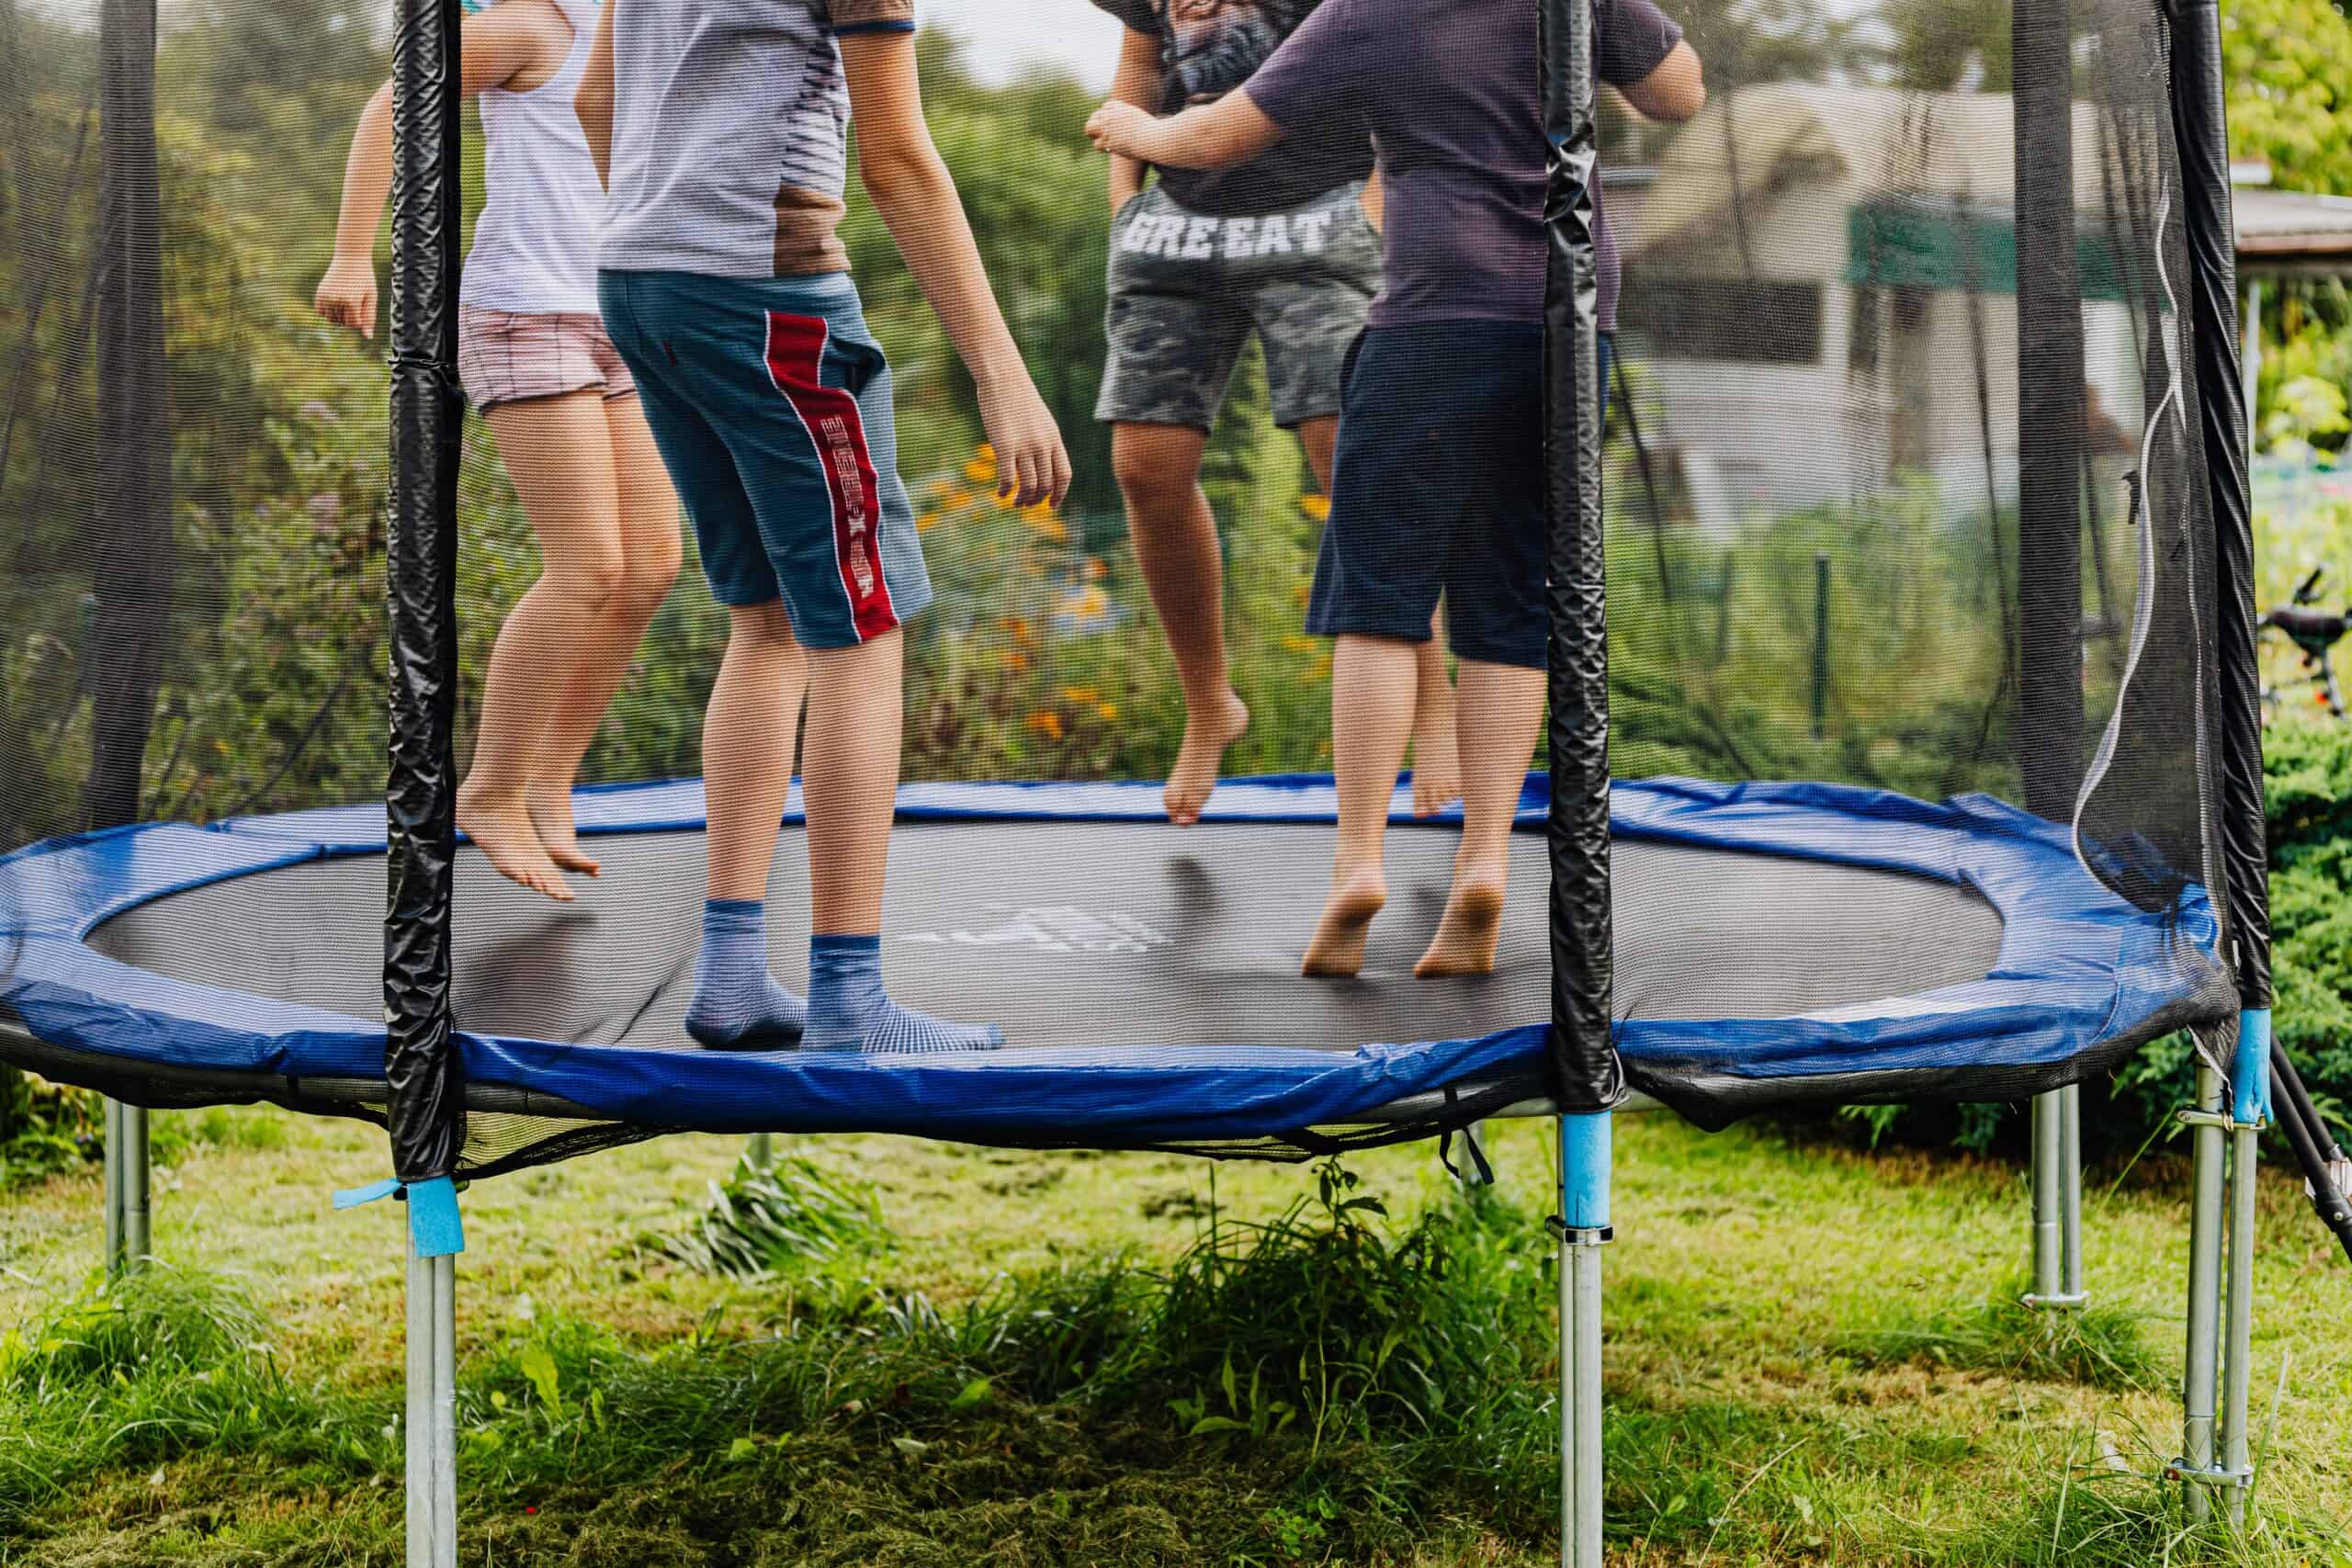 children jumping on trampoline with net in backyard outdoors